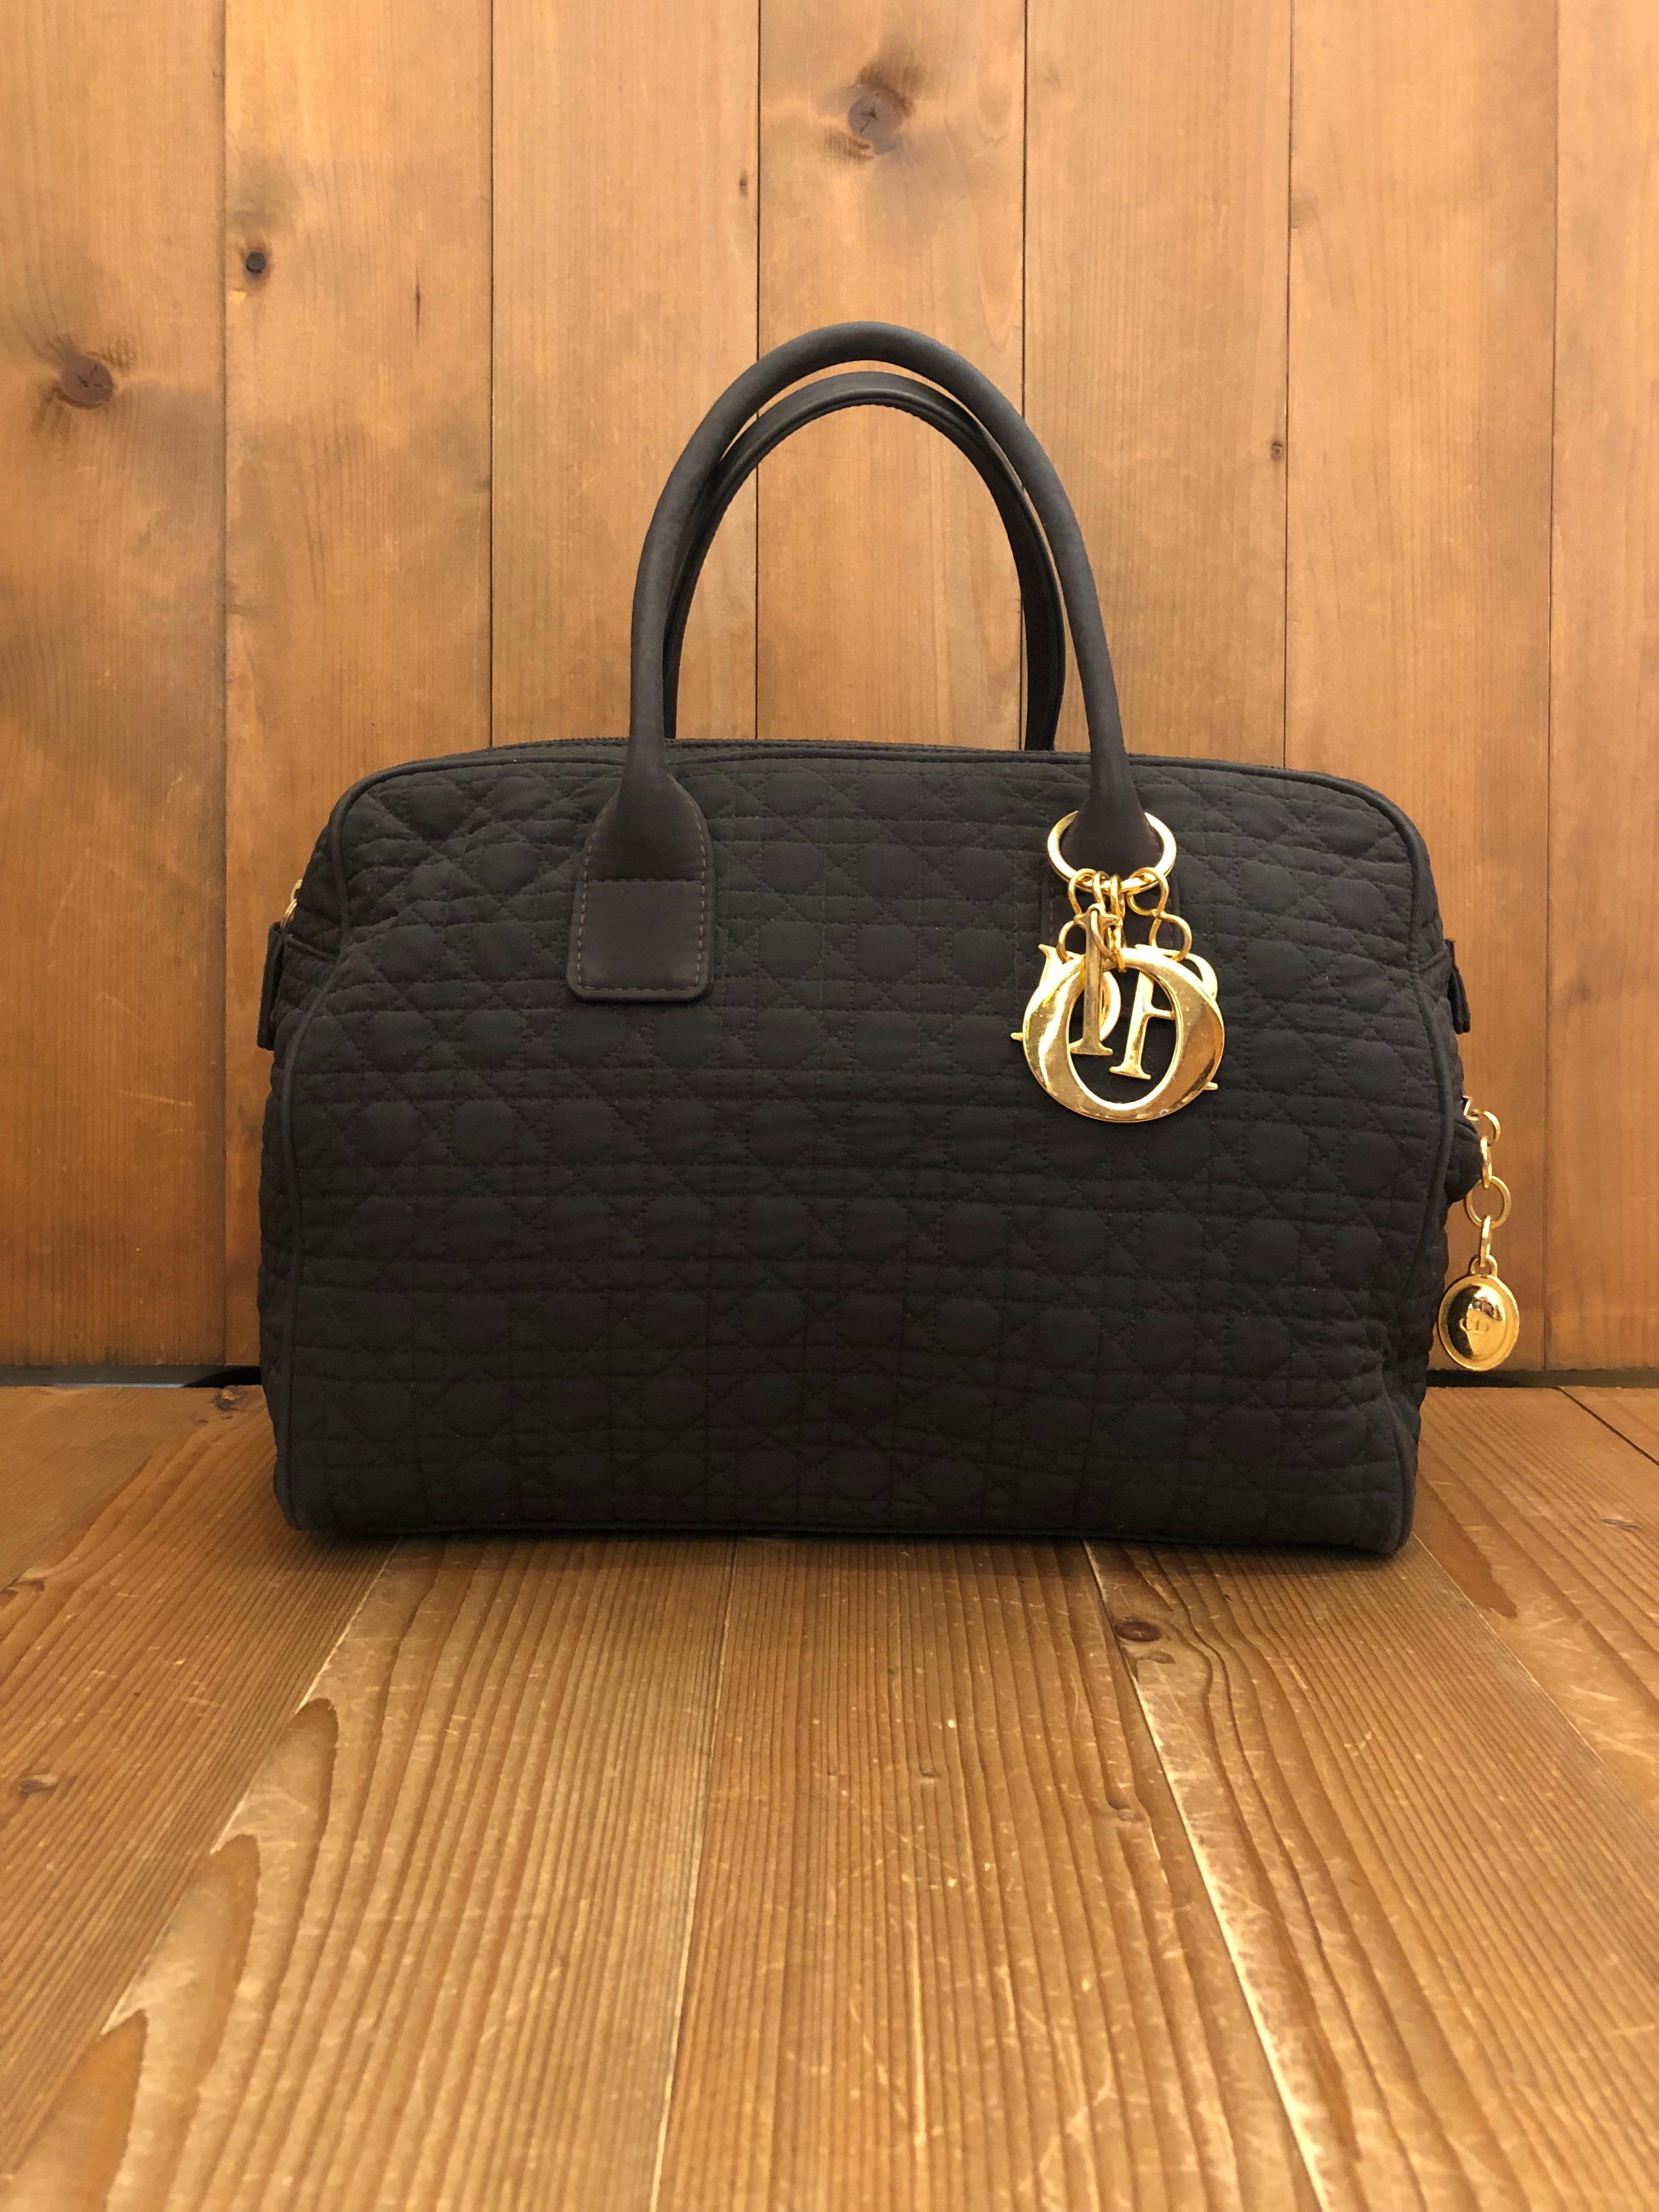 This 1990s CHRISTIAN DIOR Lady Dior boston handbag is decorated with a cannage in dark brown nylon and gold toned hardware featuring one interior zip pocket and exterior side zip pocket. Made in Italy. Measures approximately 12 x 9.5 x 5.5 inches